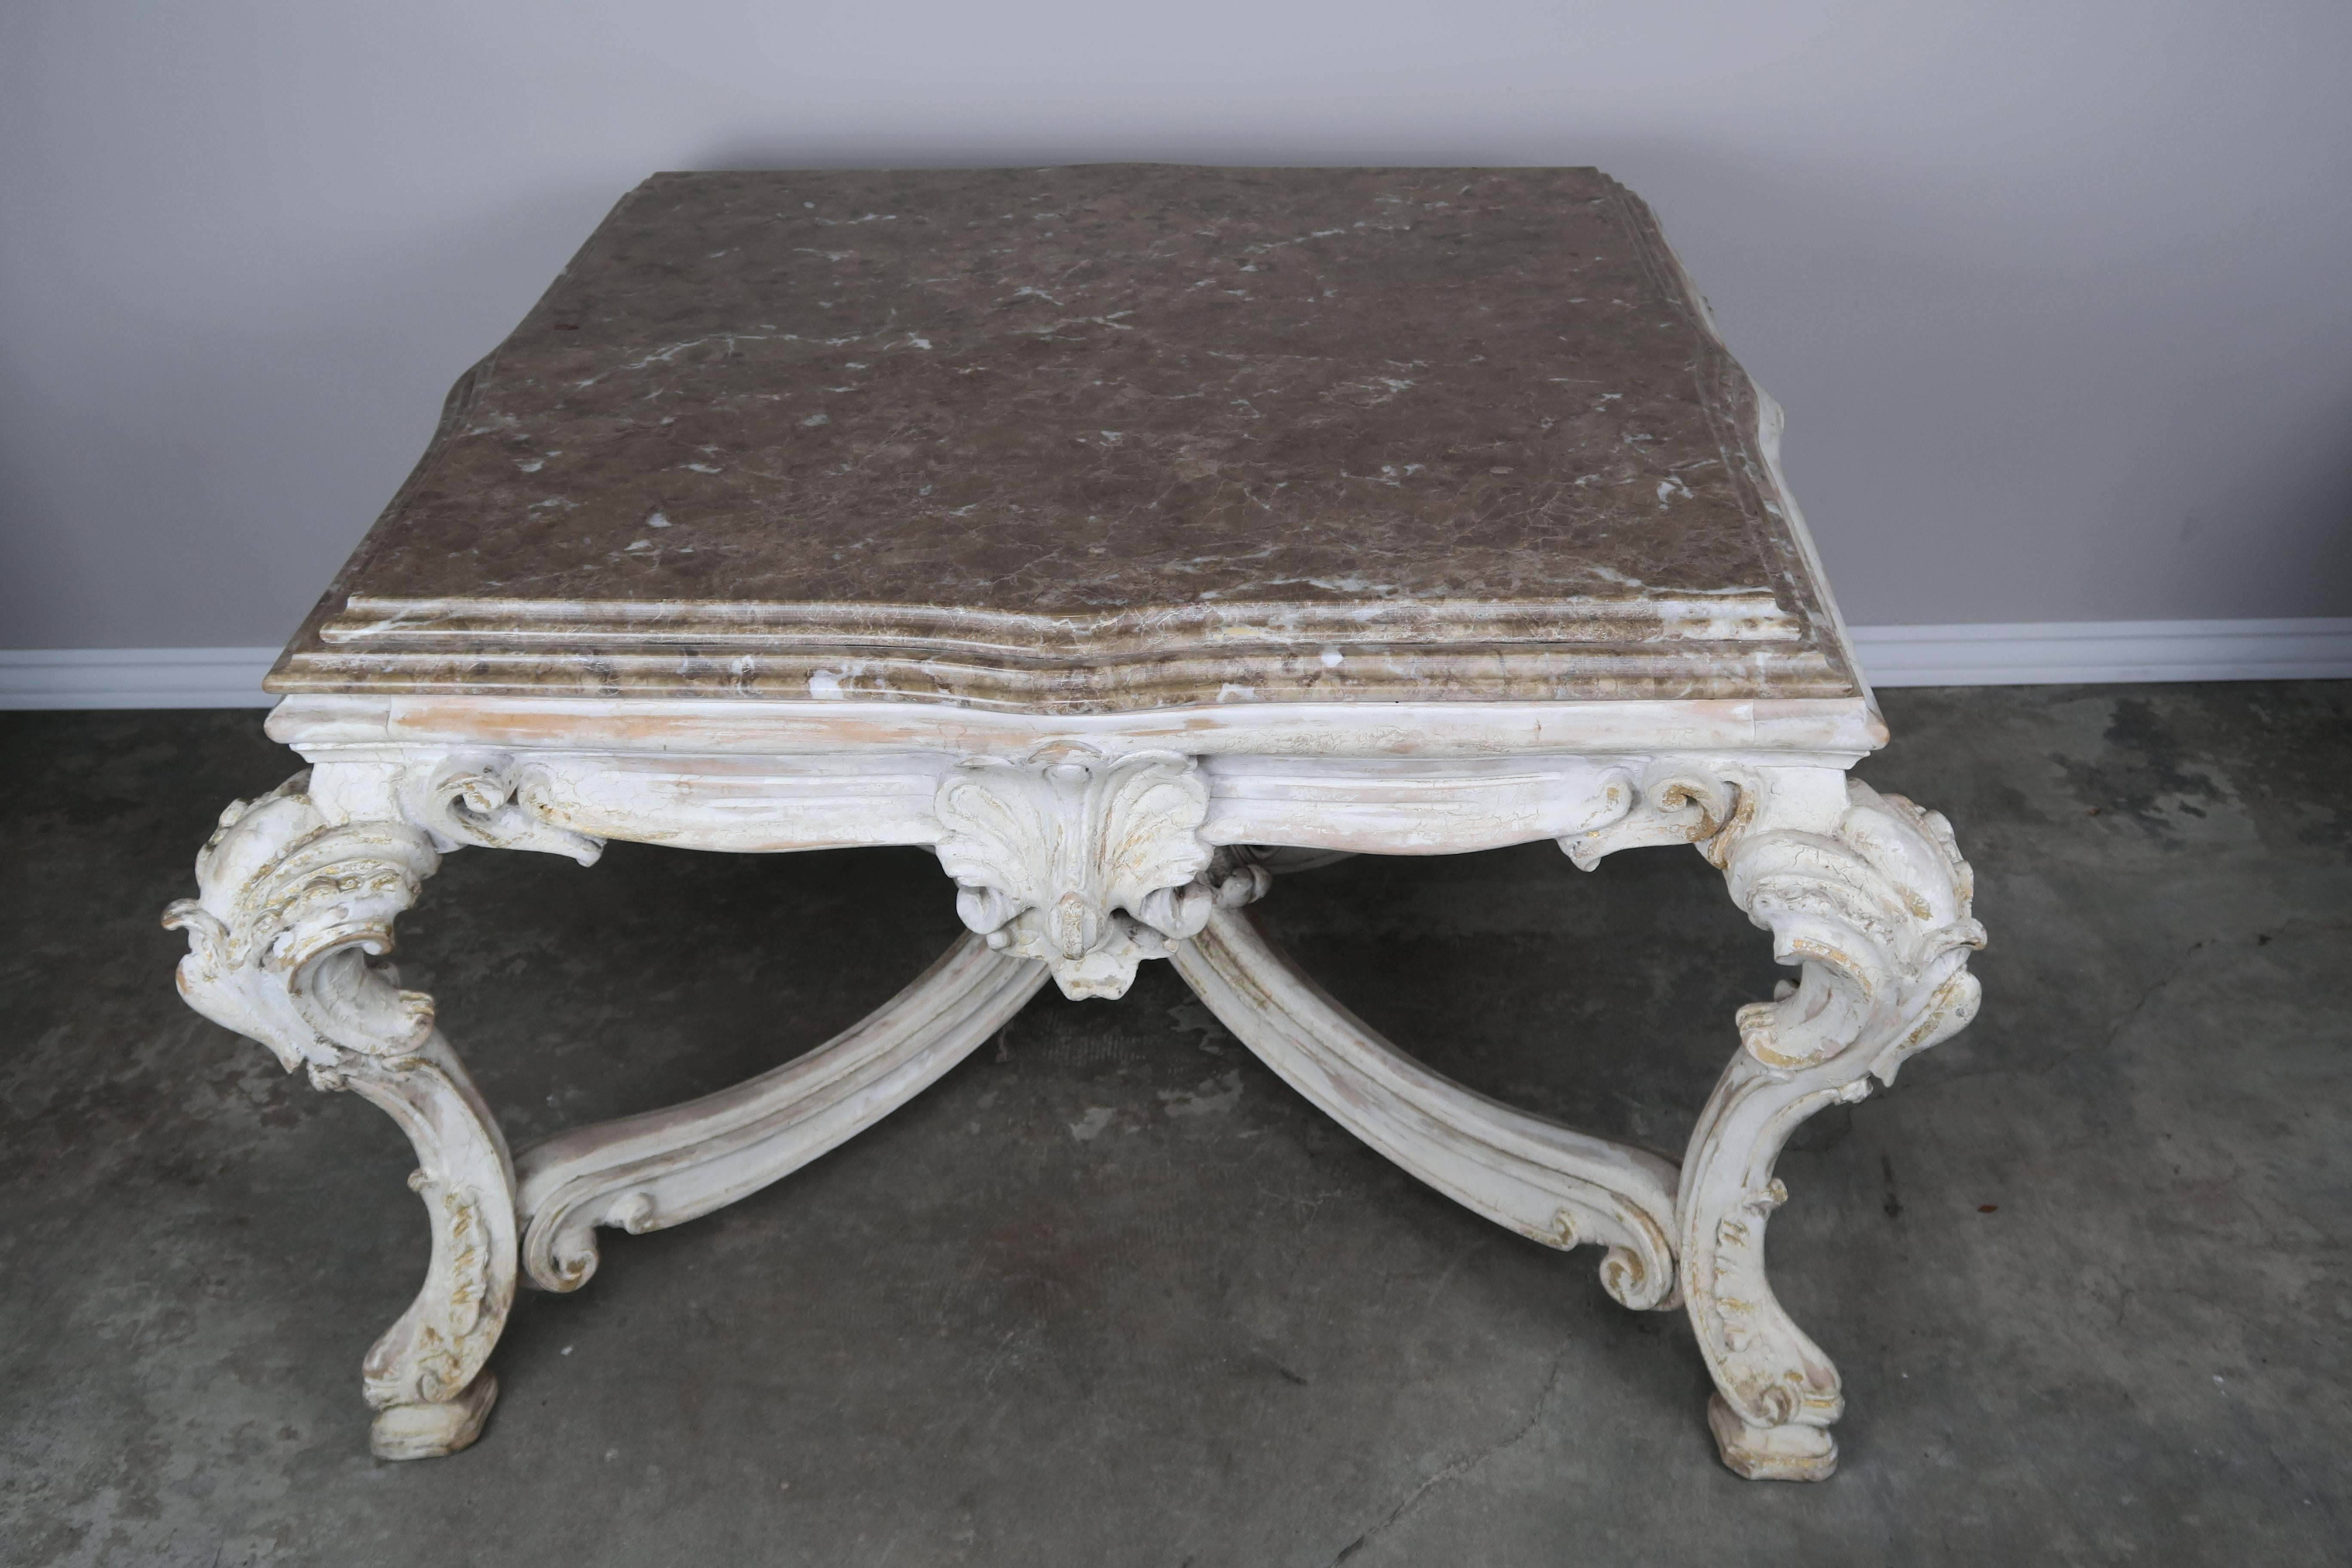 French carved Louis XV style wood painted coffee table with soft colored brown marble top. Ornate cartouche carved cabriole legs connected by a bottom stretcher that meets at a shell finial.